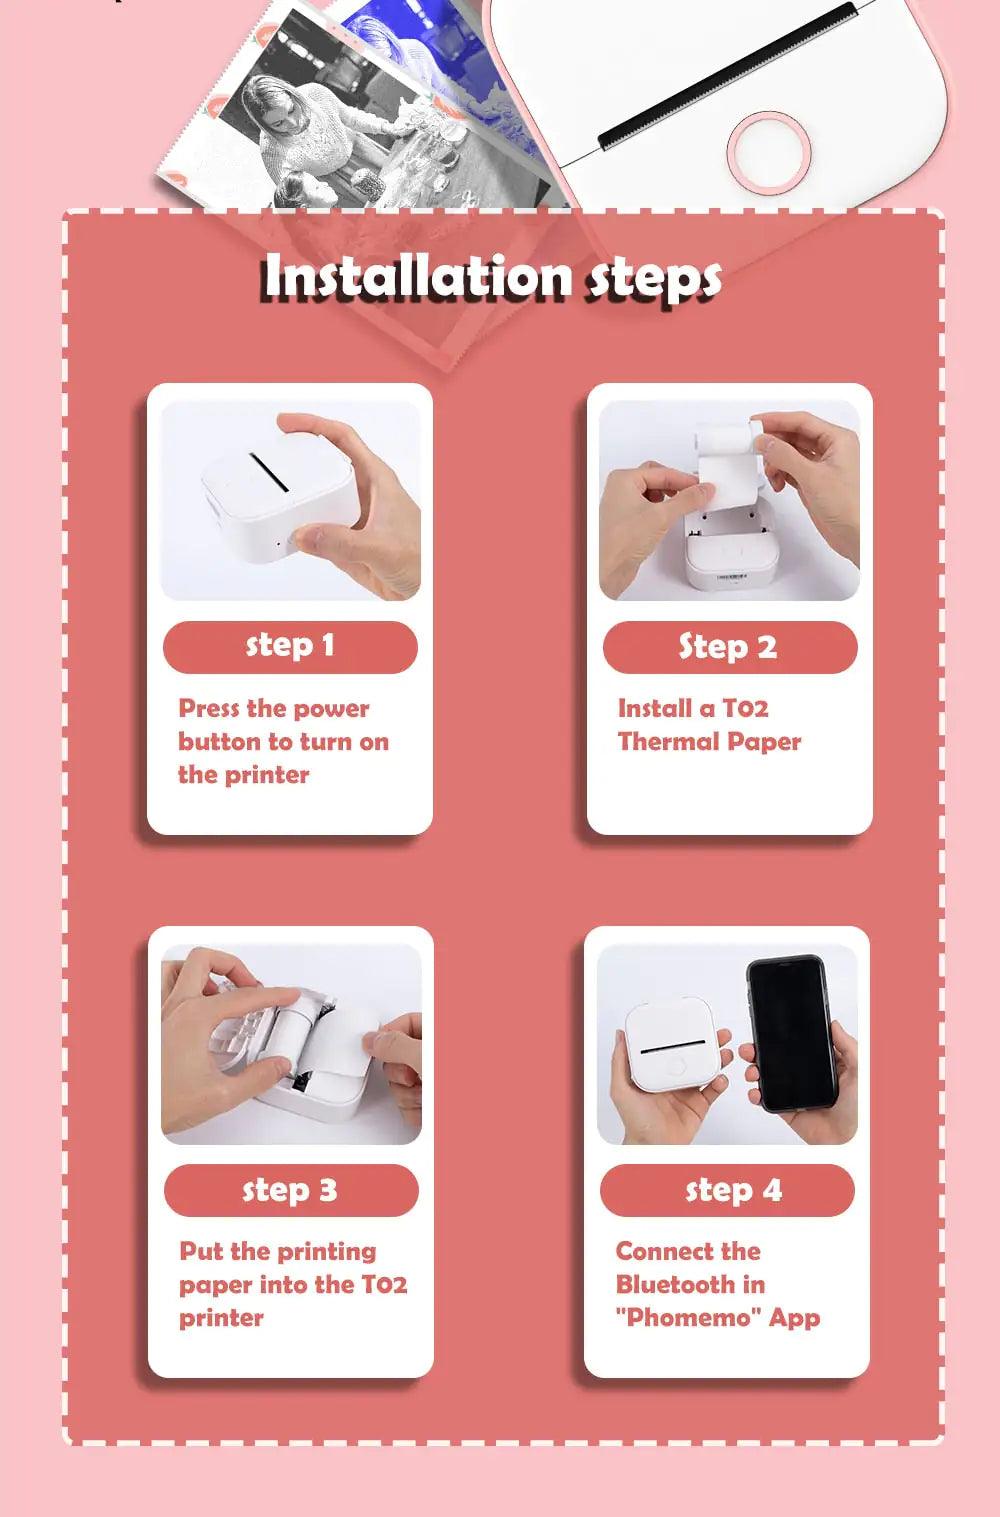 Prints Mates - Thermal Paper Package - ACO Marketplace